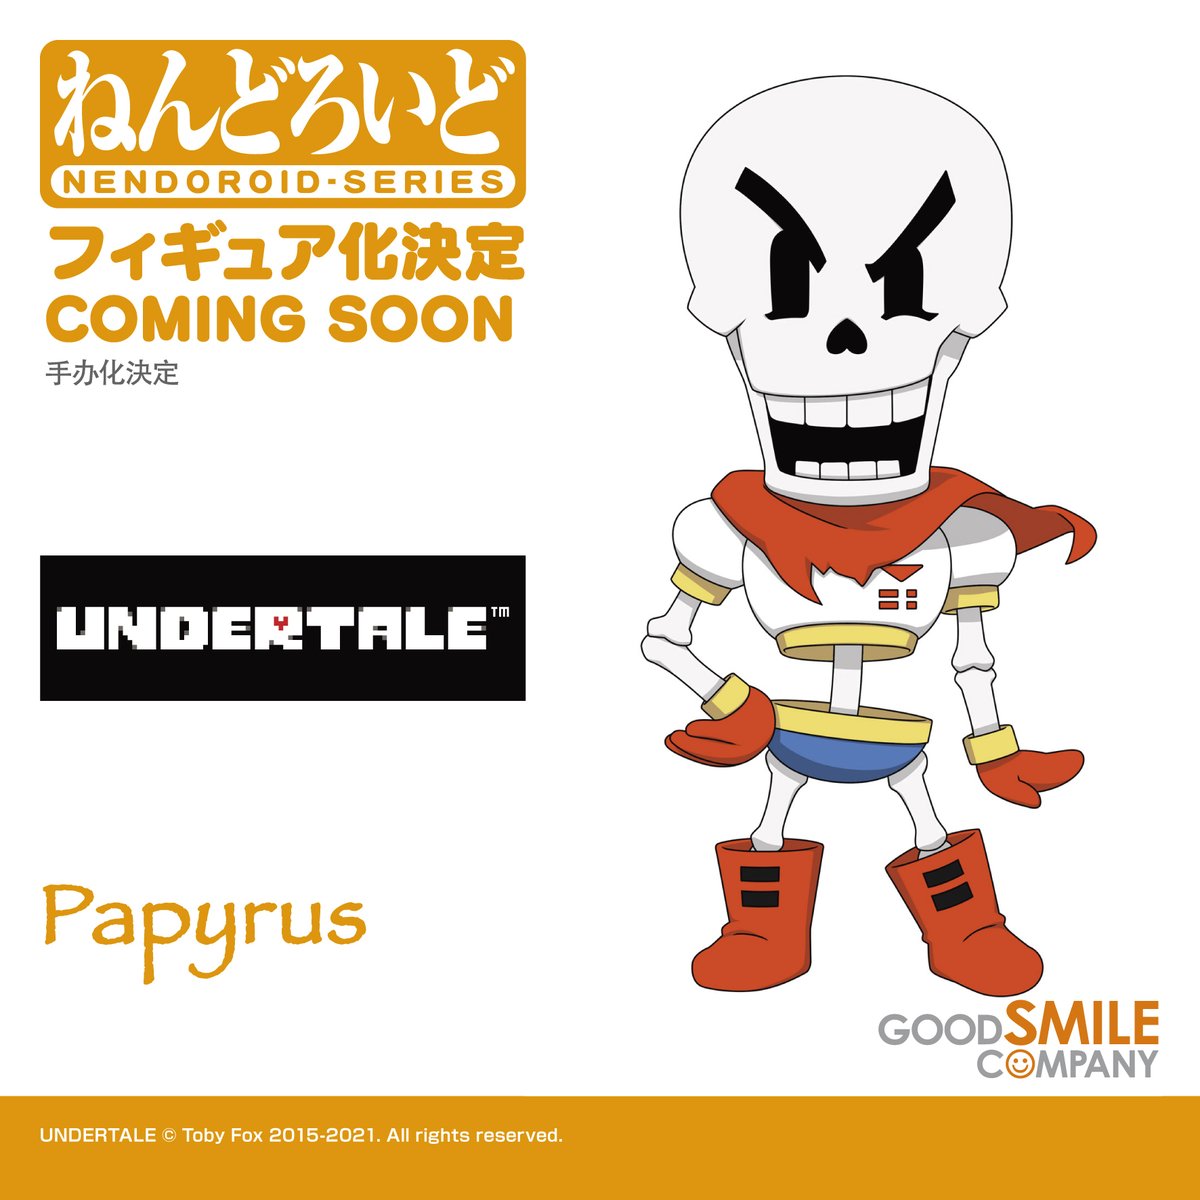 We've got big news today guaranteed to fill you with DETERMINATION! 

We're excited to announce that Nendoroids of Sans and Papyrus from 'UNDERTALE' are in the works!! Stay tuned for more information coming soon!

#undertale #nendoroid #goodsmile